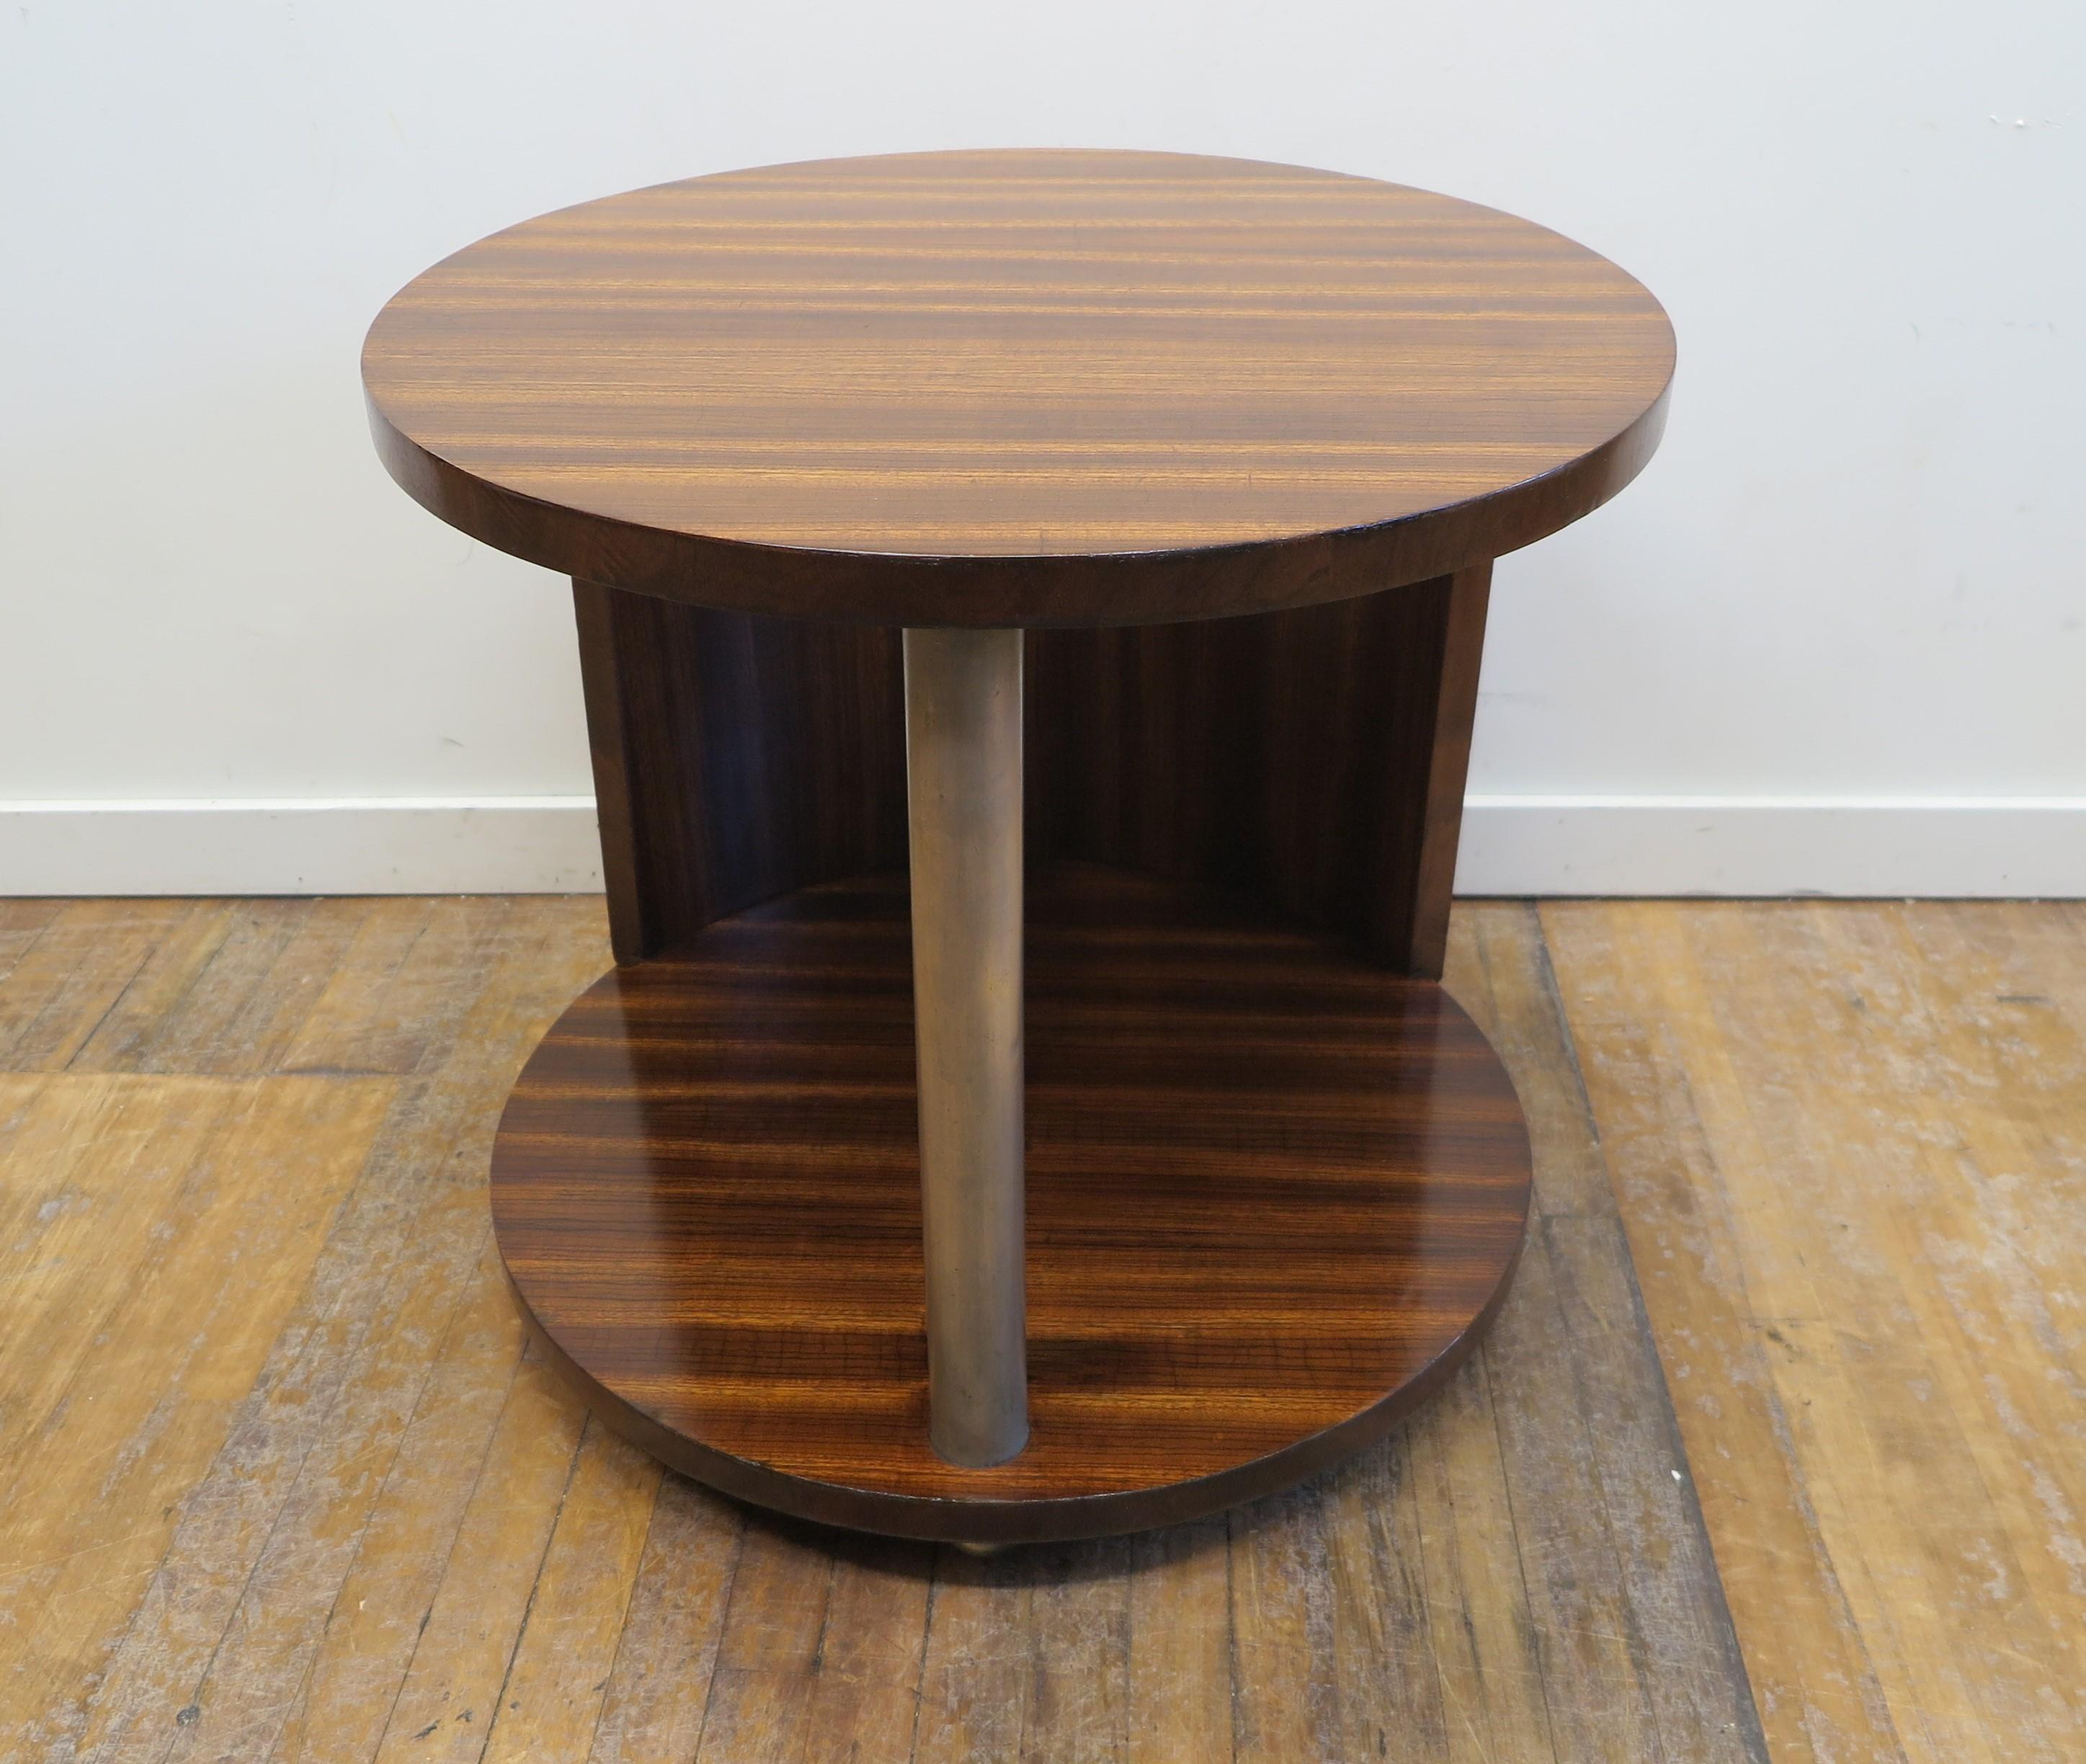 French Modernist Art Deco side table attributed to Etienne Kohlmann in rosewood with nickeled bronze Colum and demi lune plate over rear leg. Period French Art Deco rosewood circular table with metal column circa 1935. In very good condition.